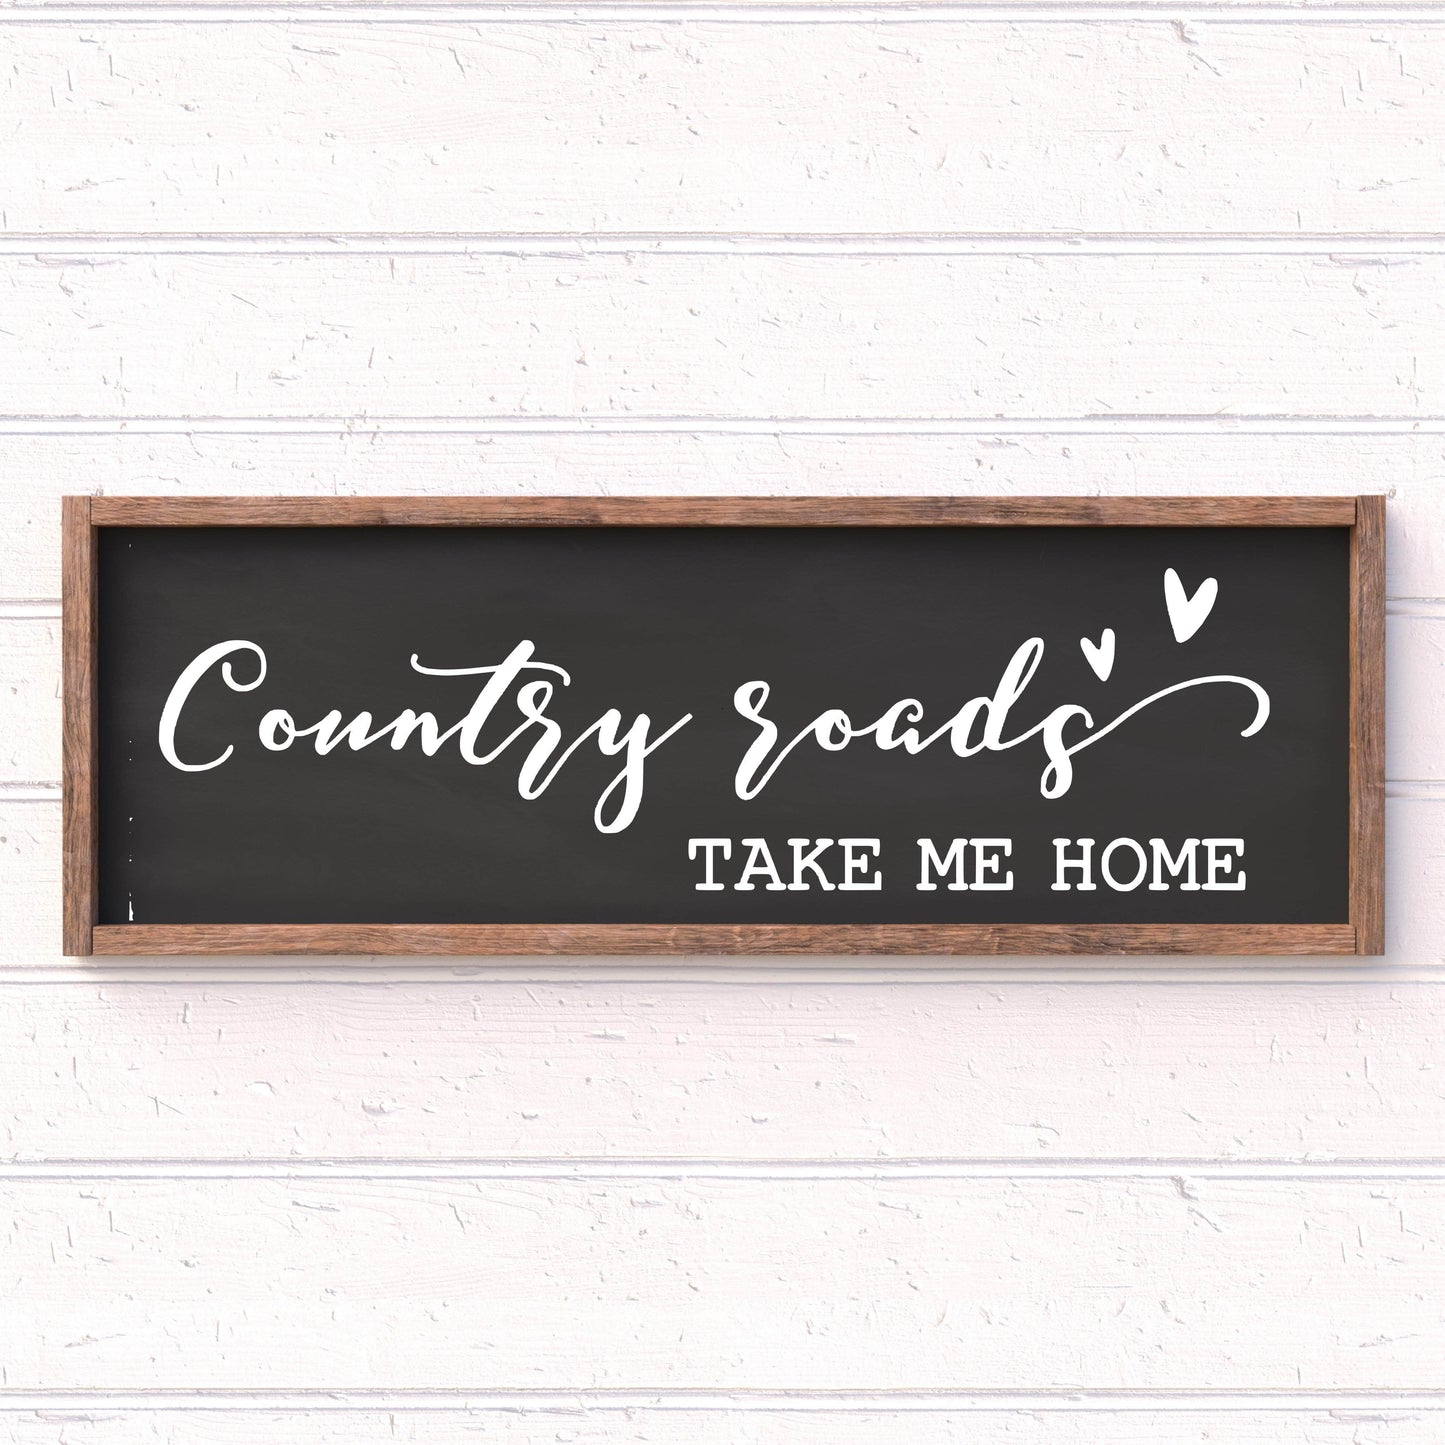 Country Roads take me Home framed wood sign, farmhouse sign, rustic decor, home decor